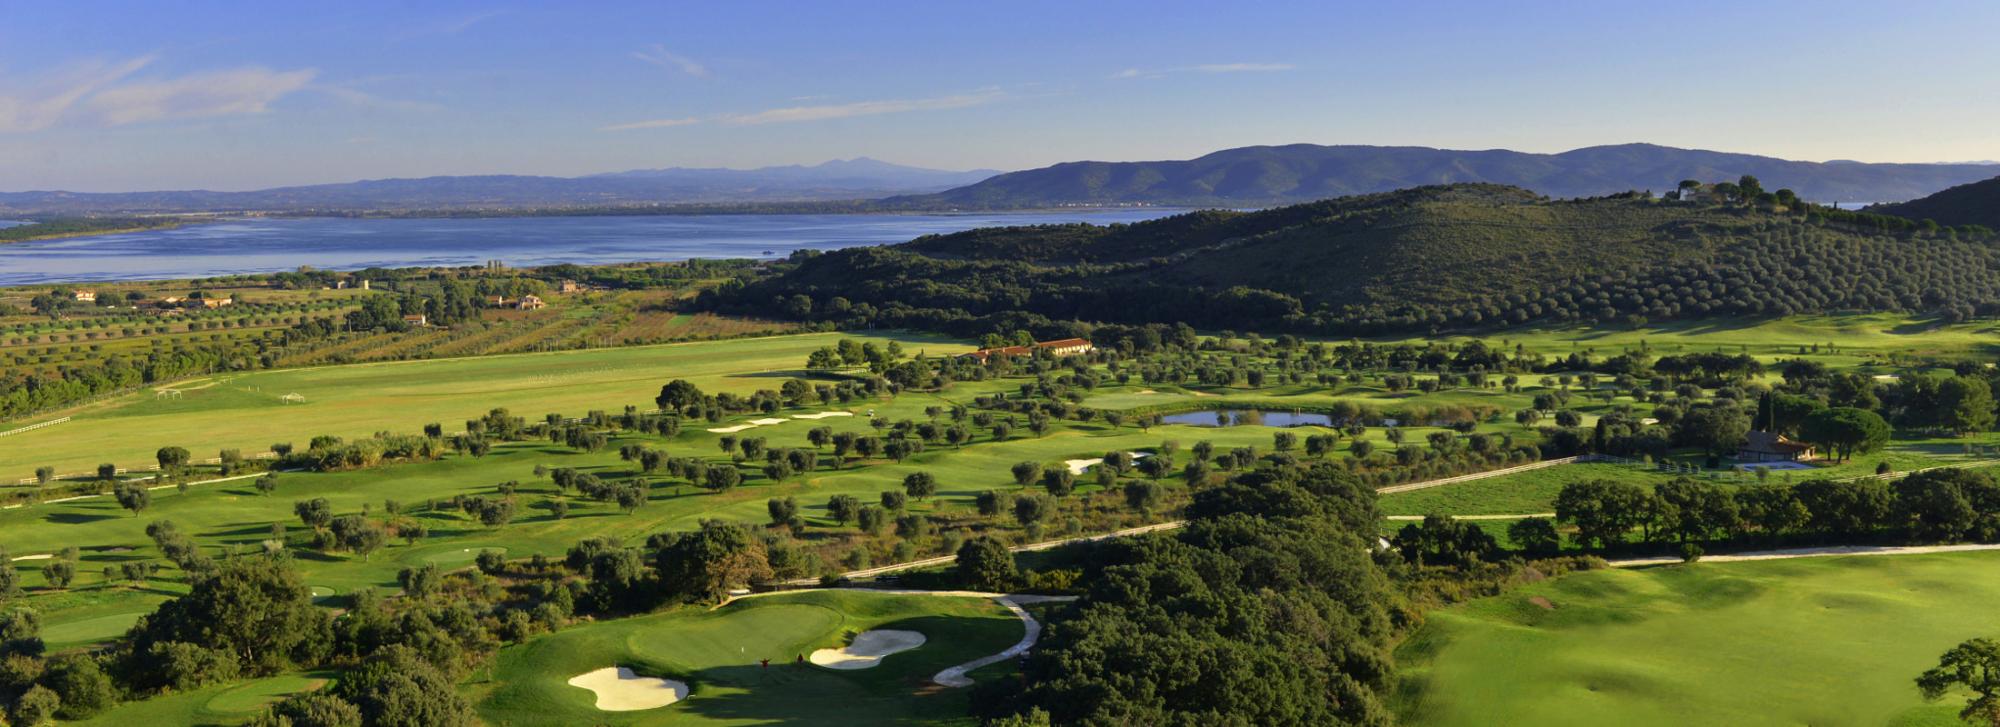 The Argentario Golf Club's impressive golf course situated in gorgeous Tuscany.